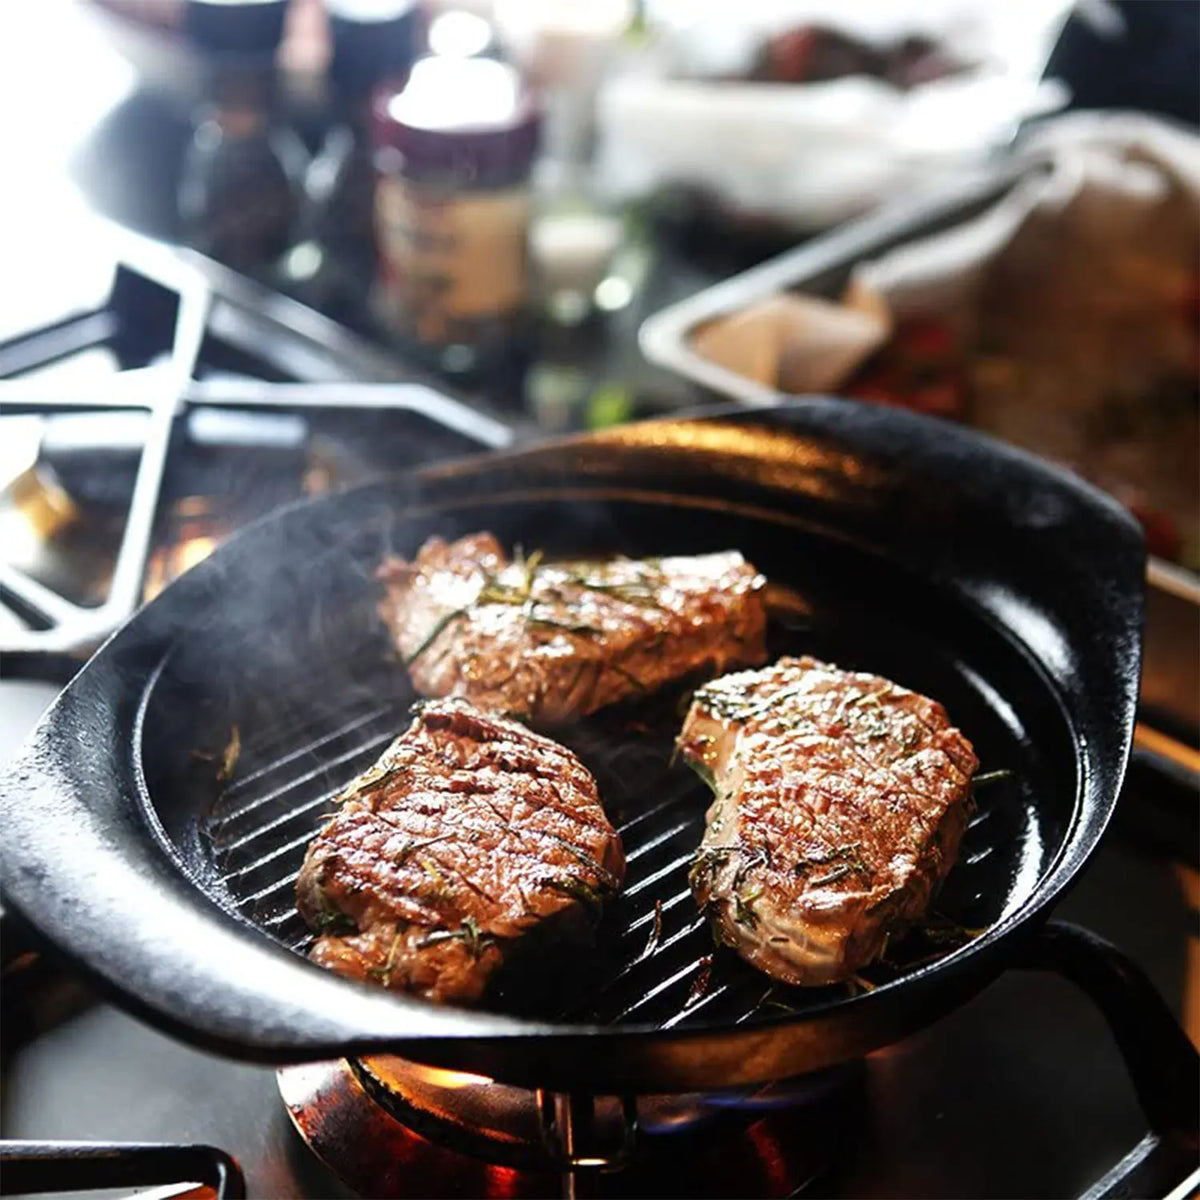 How To: Cook A Steak In A Cast Iron Skillet, by Jordan Fetter